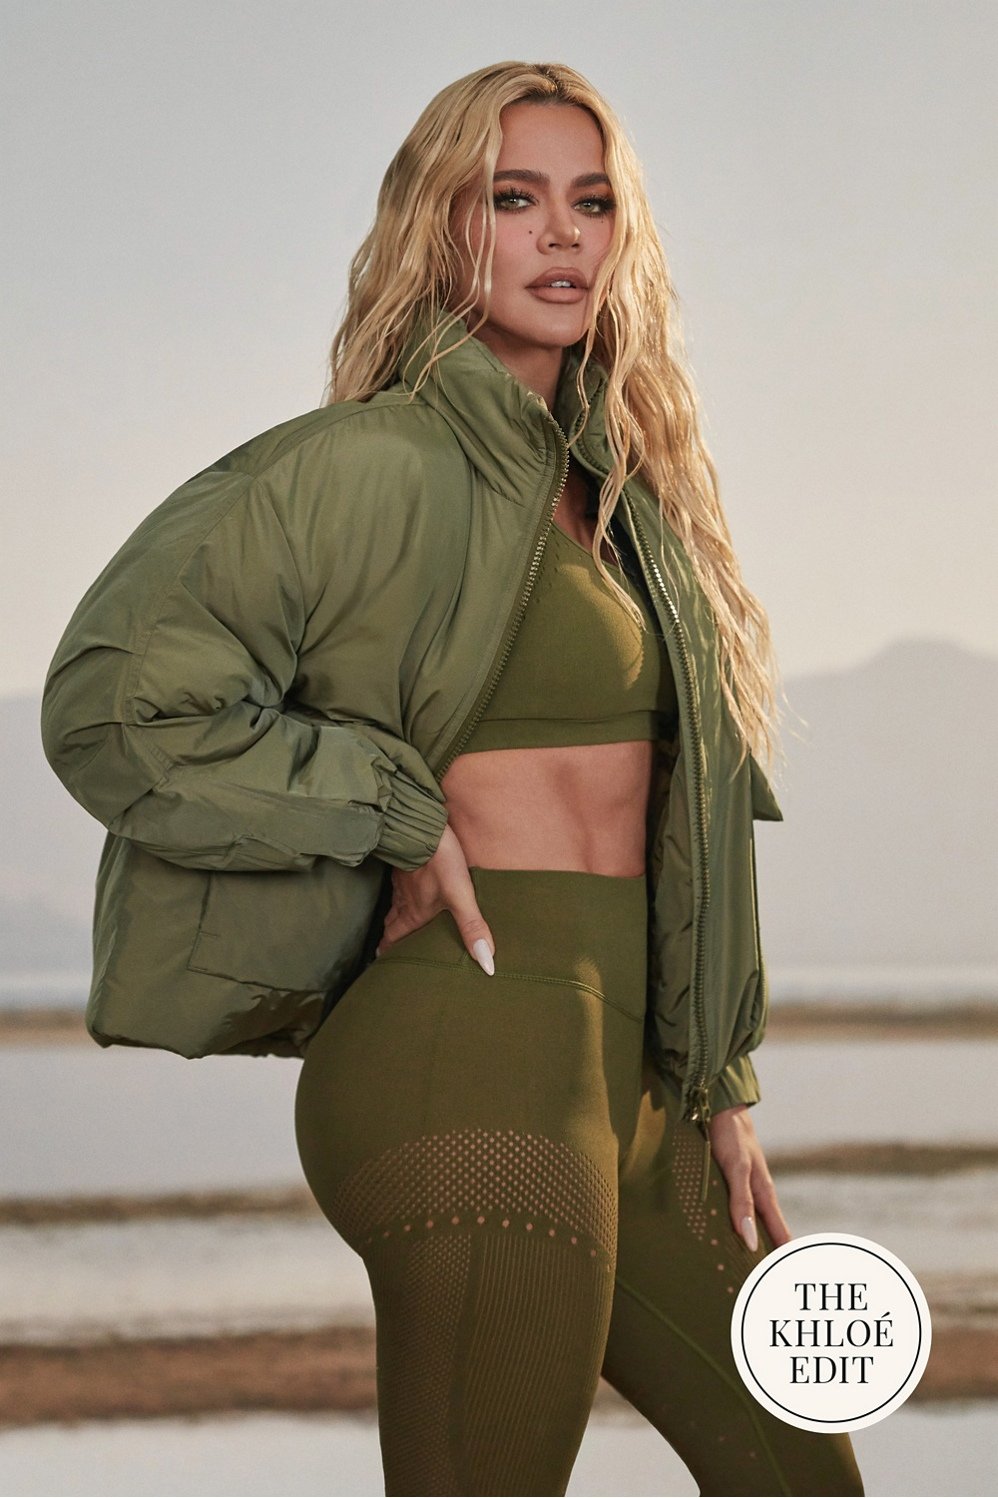 The One Jacket - Fabletics